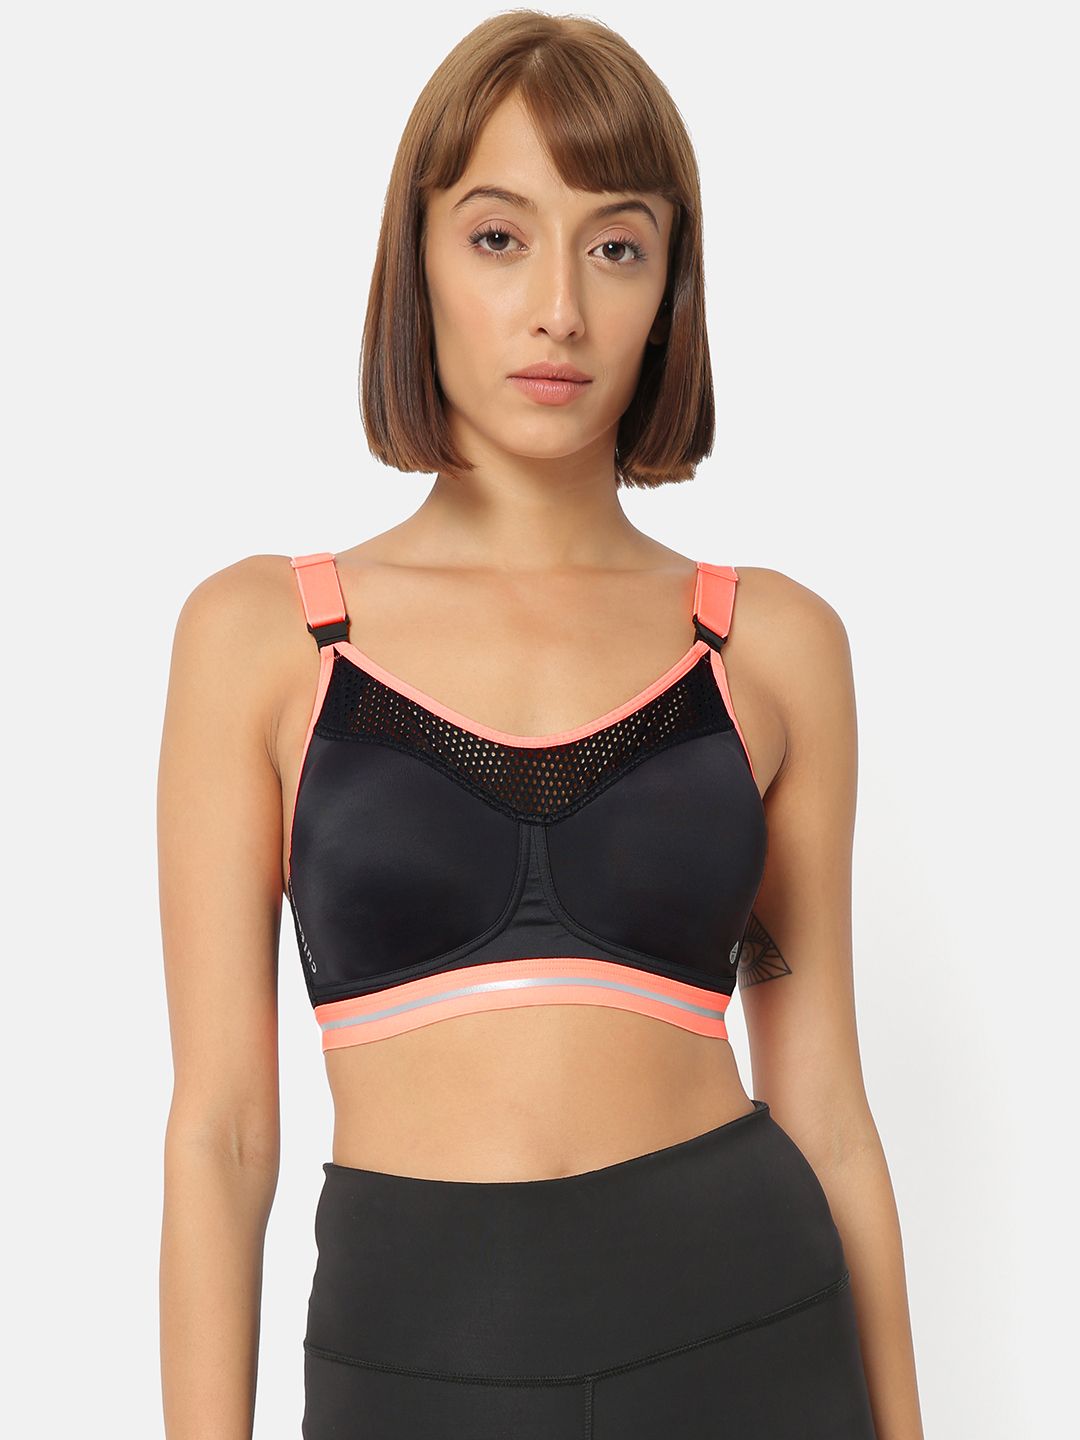 Cultsport Black Solid Non-Wired Lightly Padded Antimicrobial Sports Bra AW19WS1233A Price in India